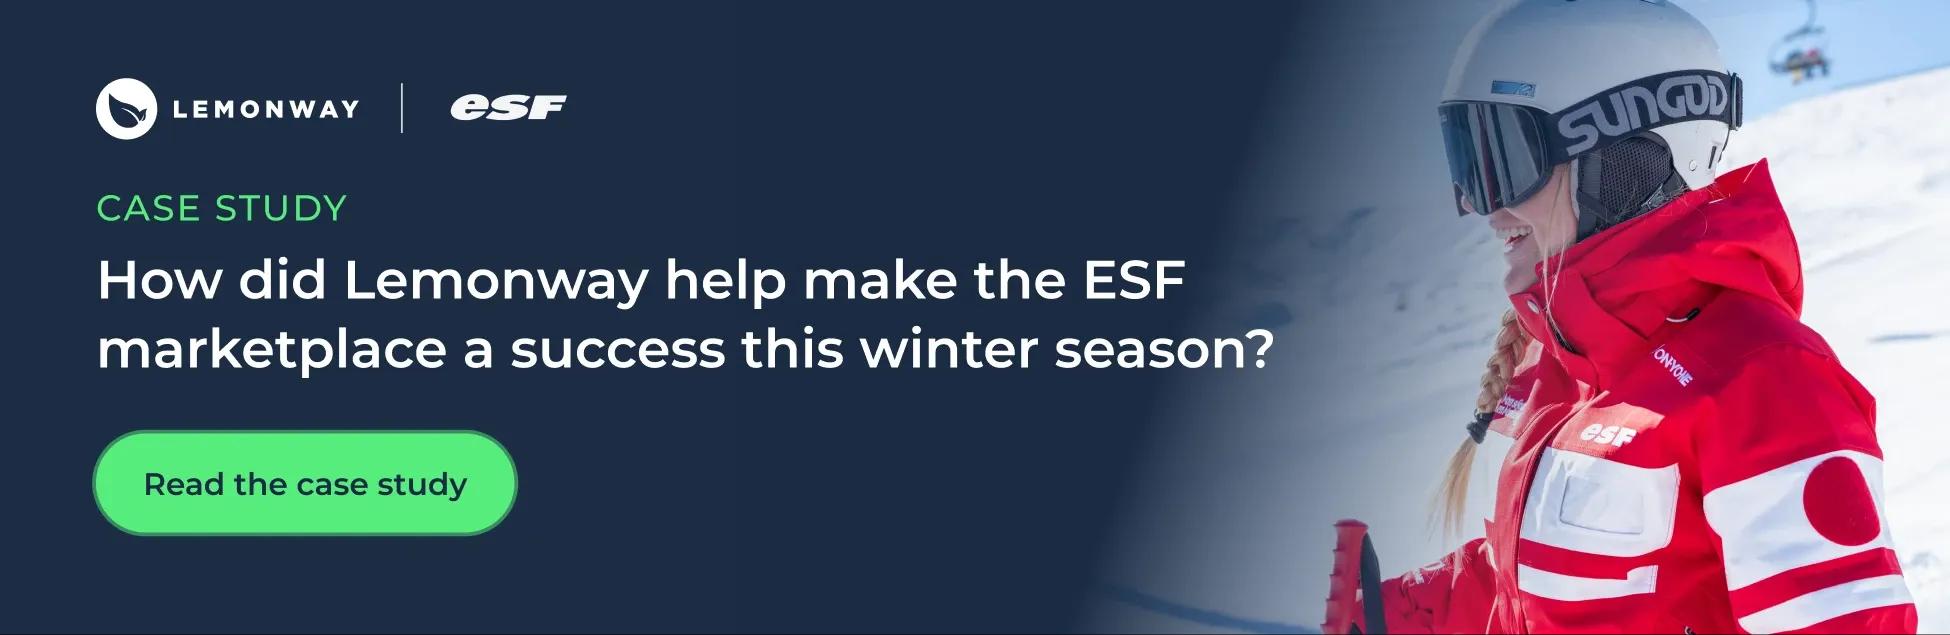 Case study: How did Lemonway help make the ESF marketplace a success this winter season?